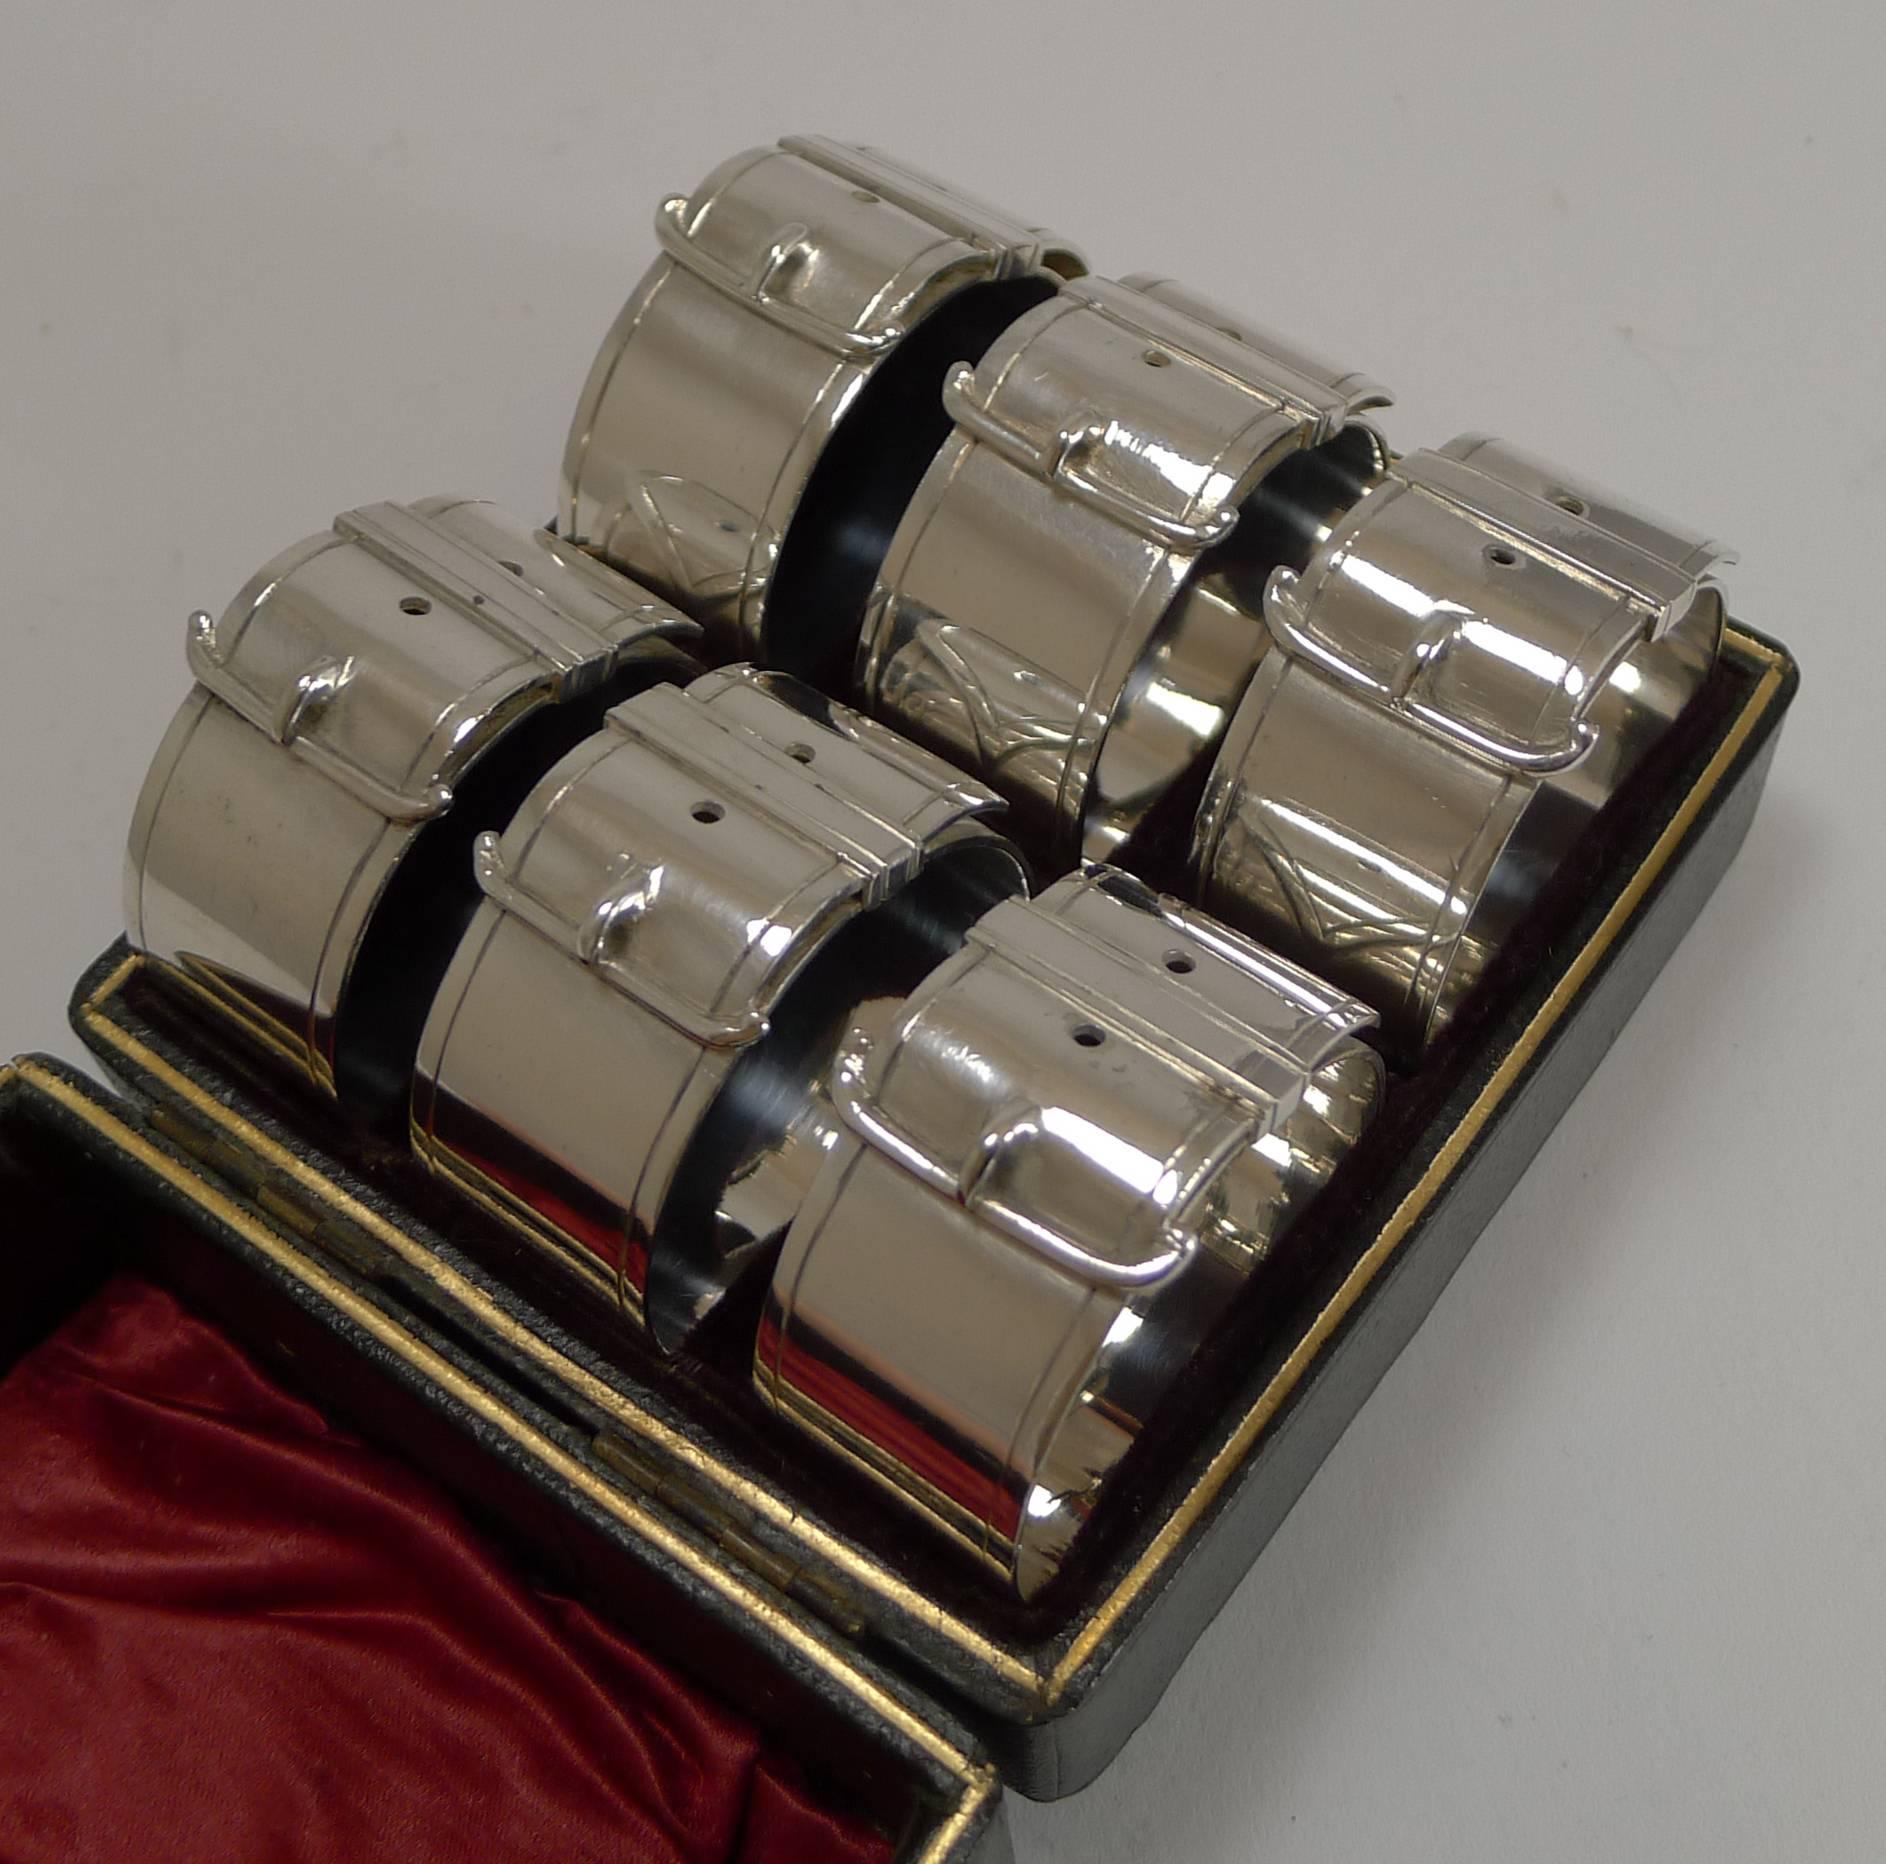 A fabulous quality set of six silver plated napkin rings in beautiful condition and still in their original presentation box.

All are cast with a belt buckle design, a motif popular in the late Victorian era, these dating to circa 1890.

The